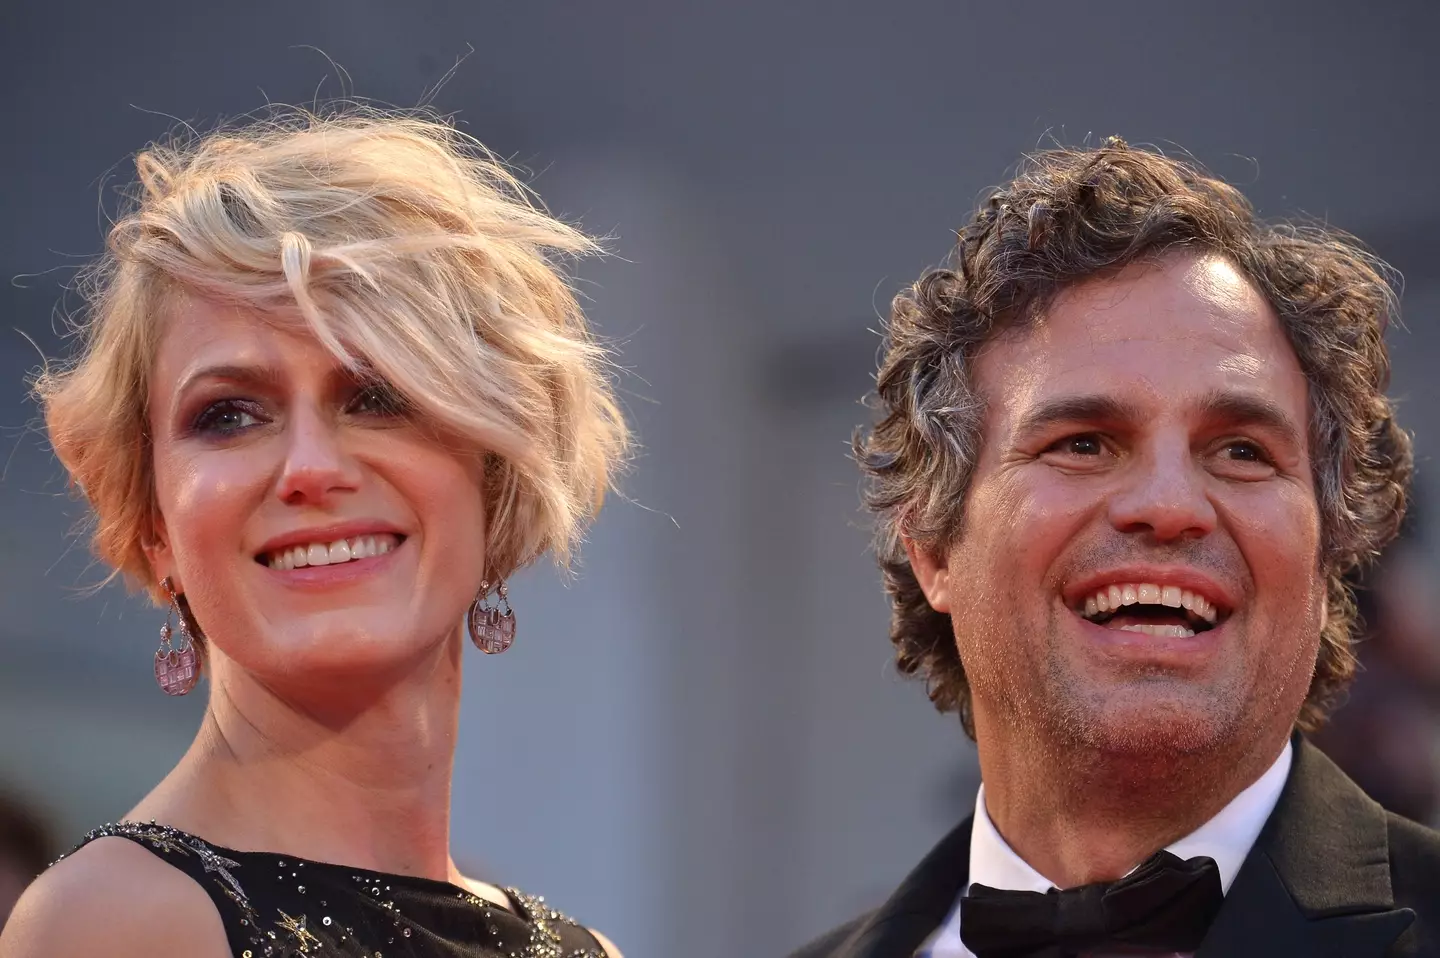 Ruffalo was diagnosed with a benign brain tumor over 20 years ago.